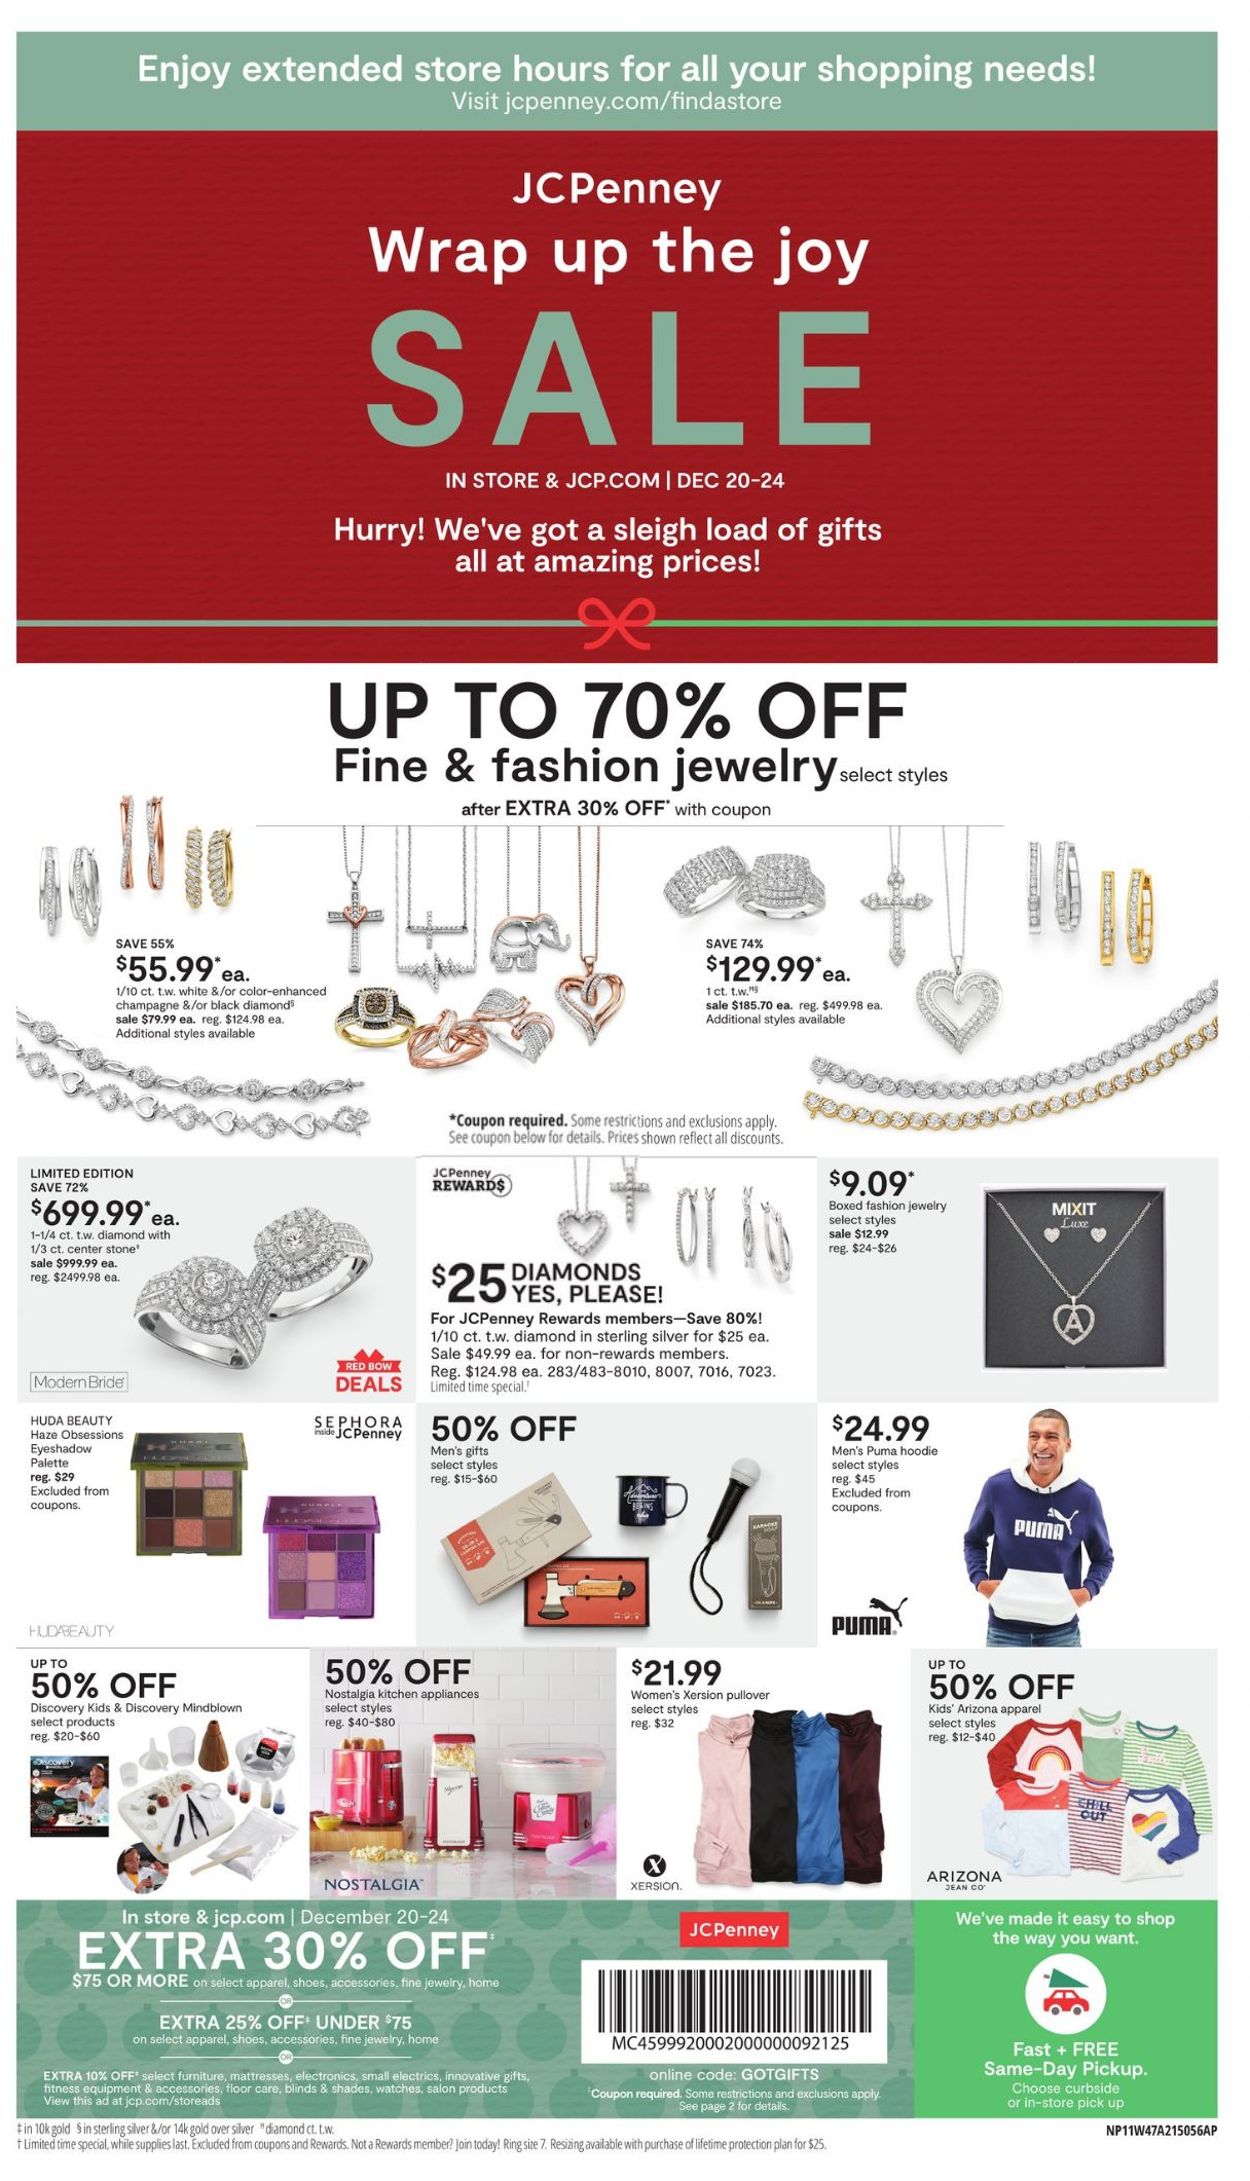 JCPenney Wrap Up The Joy Sale 2020 Weekly Ad Circular - valid 12/20-12/24/2020